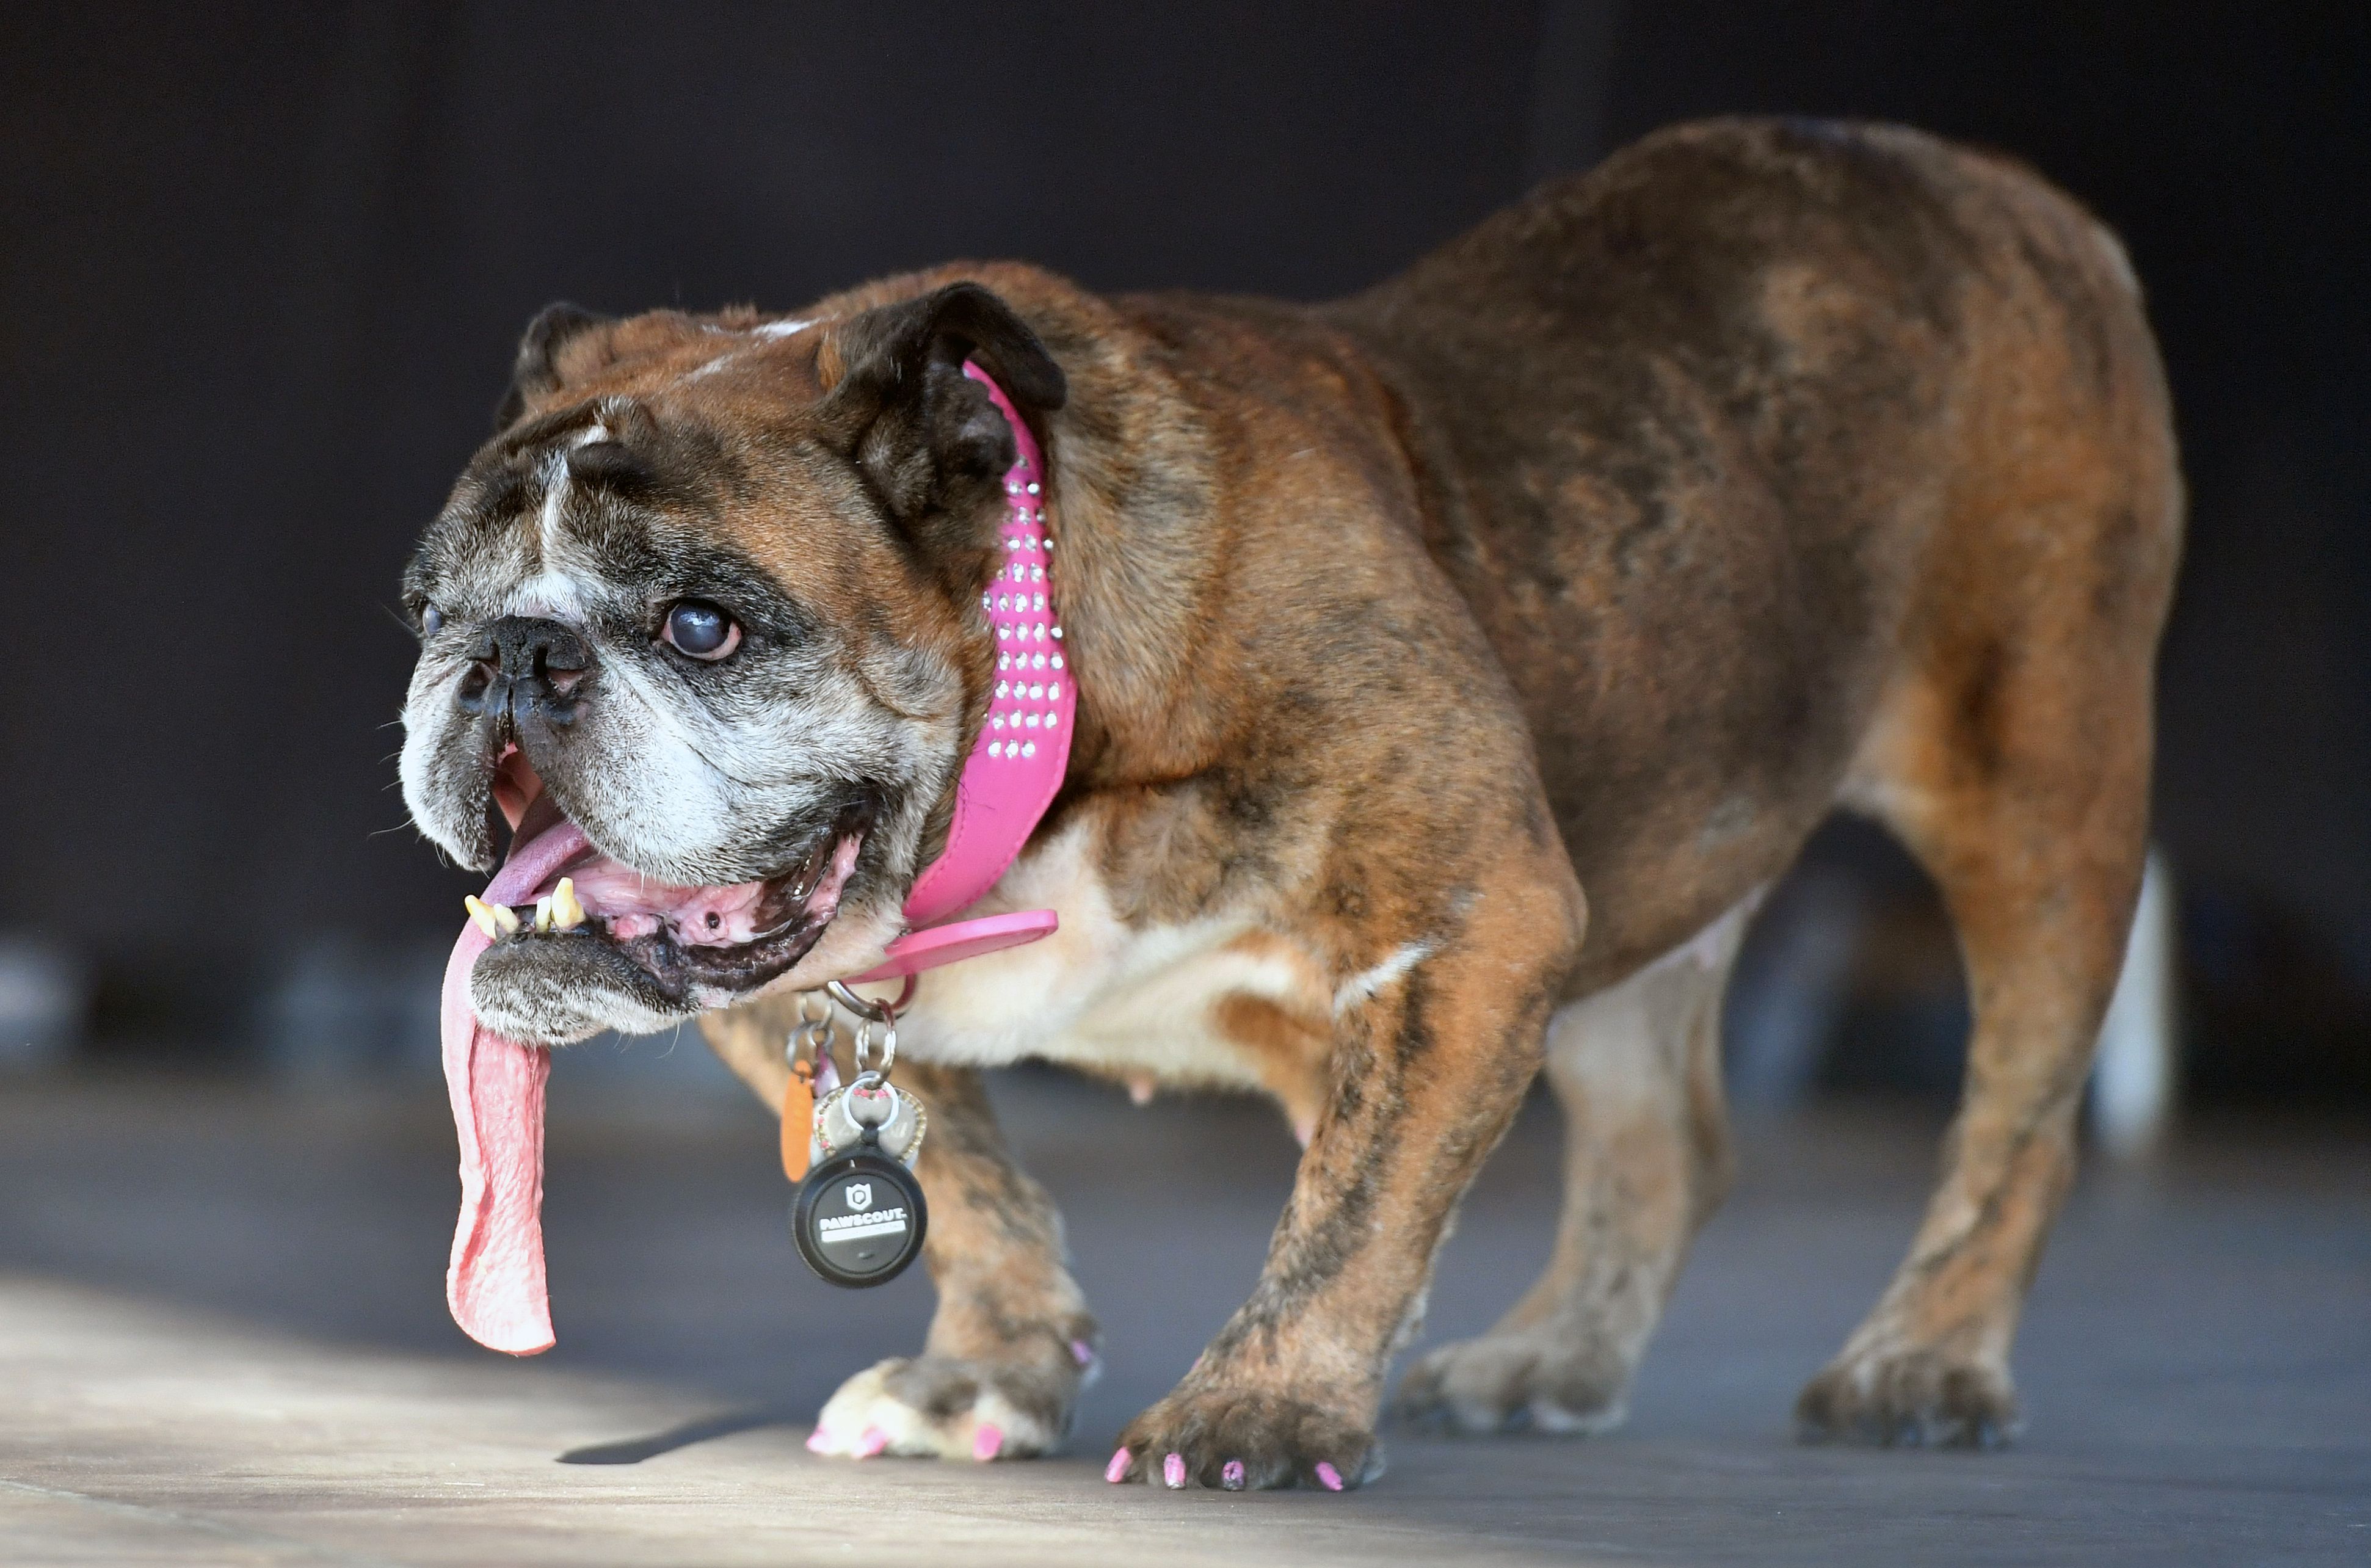 Zsa Zsa, an English Bulldog, stands on stage after winning The World's Ugliest Dog Competition in Petaluma, north of San Francisco, California on June 23, 2018. - Zsa Zsa won first place and was awarded $1500, a trophy, and will be flown to New York for media appearances.